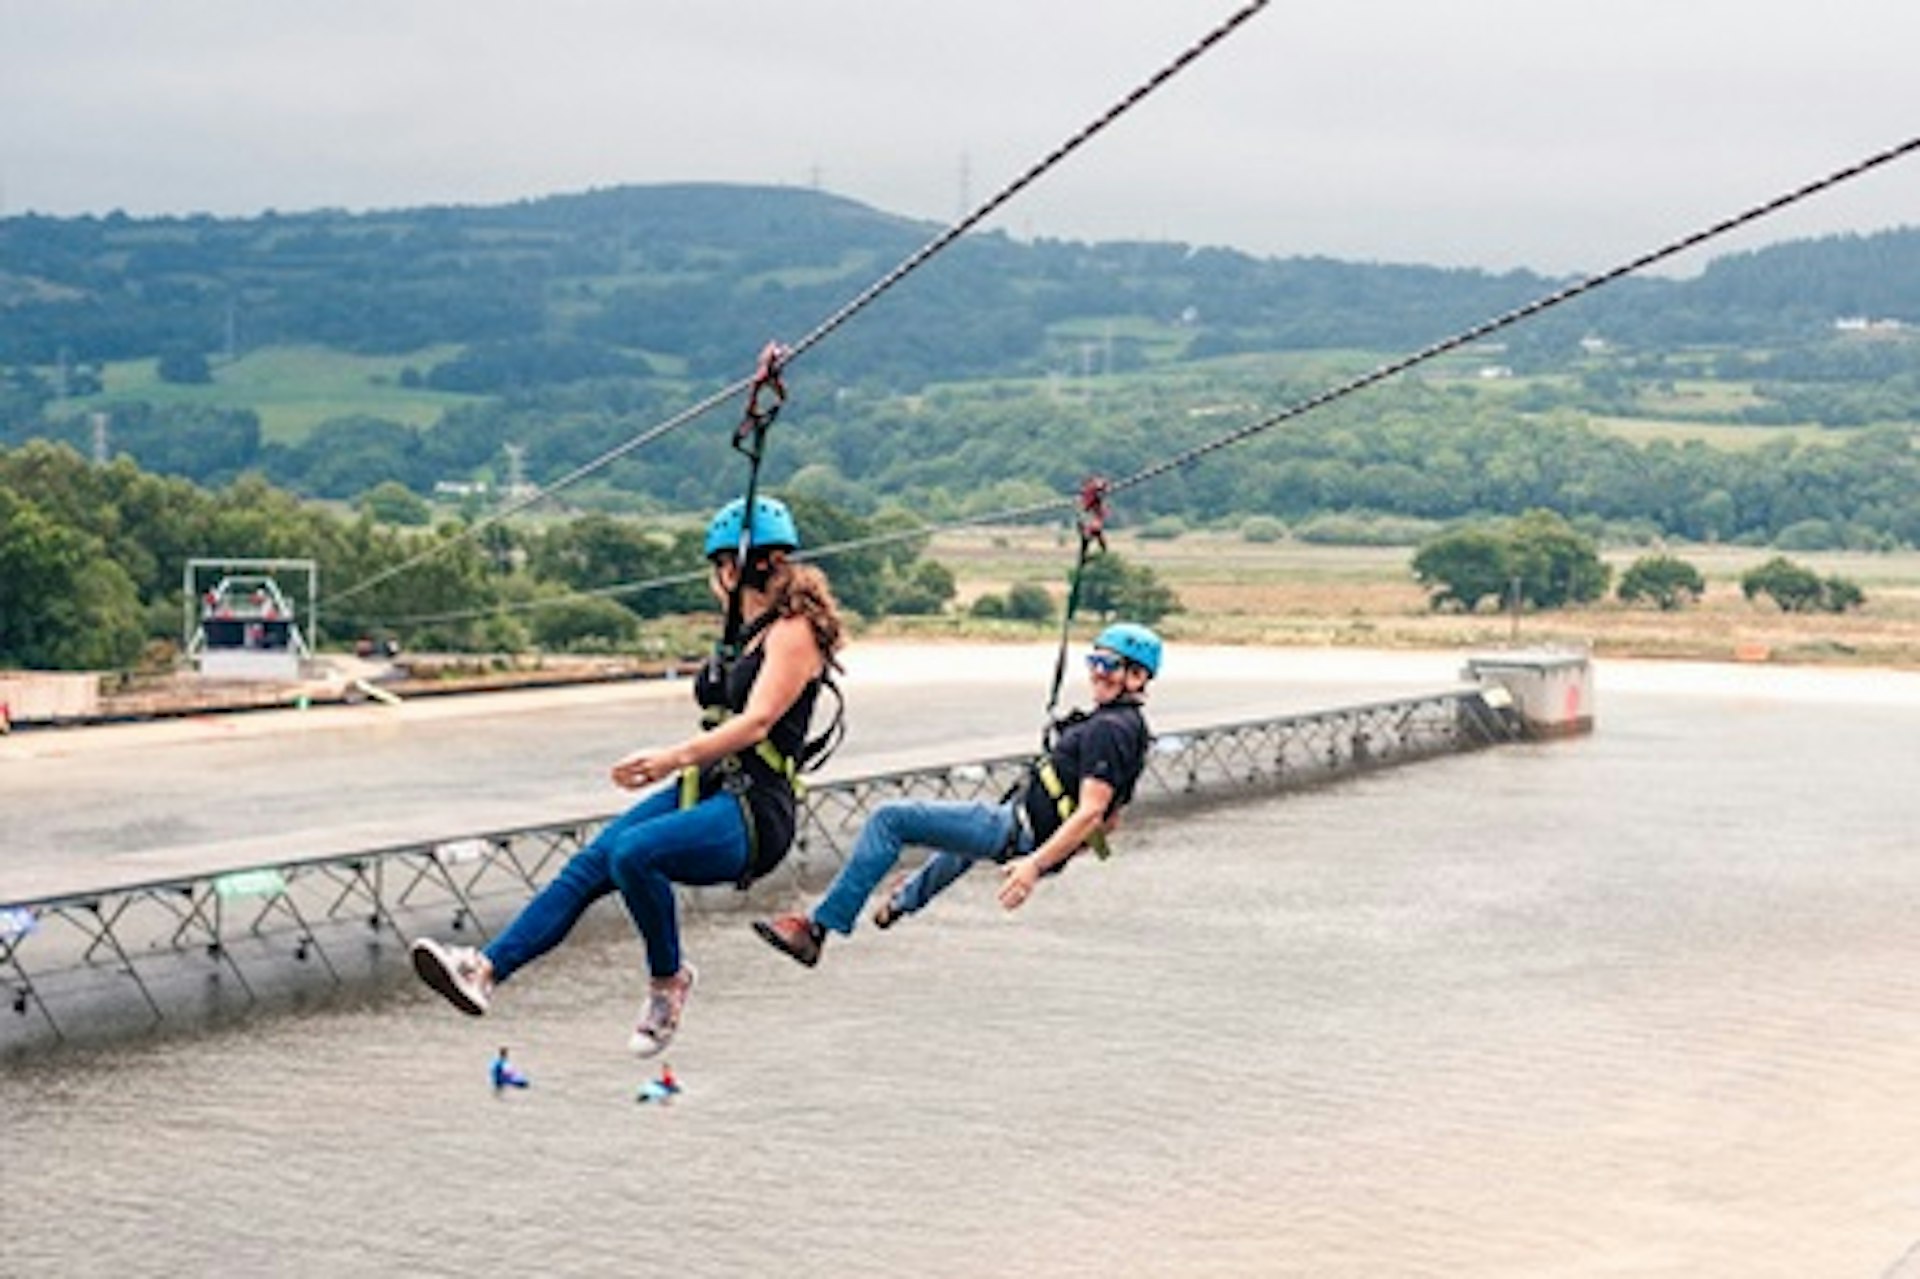 Zip Line Over the Surf Lagoon for Two at Adventure Parc Snowdonia 1